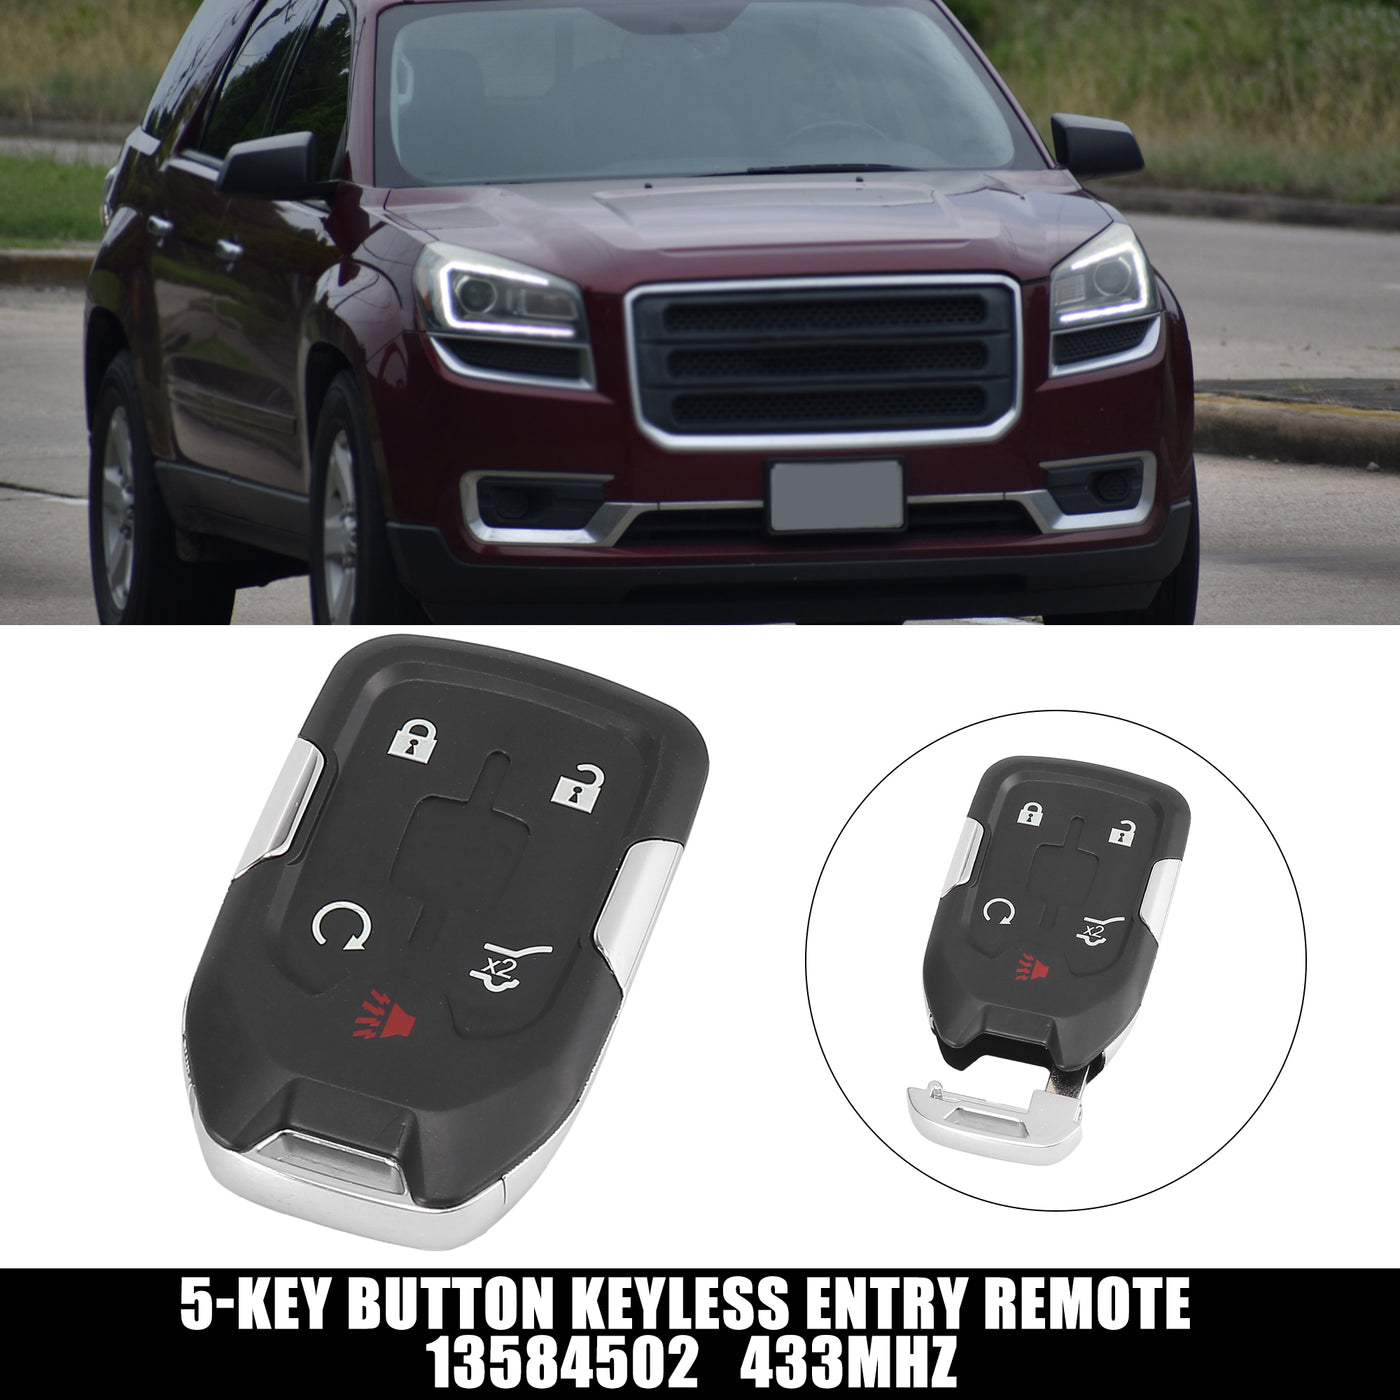 X AUTOHAUX HYQ1EA 433MHz Replacement Keyless Entry Remote Car Key Fob for GMC Acadia 2017 2018 2019 2020 13508275 5 Key Button